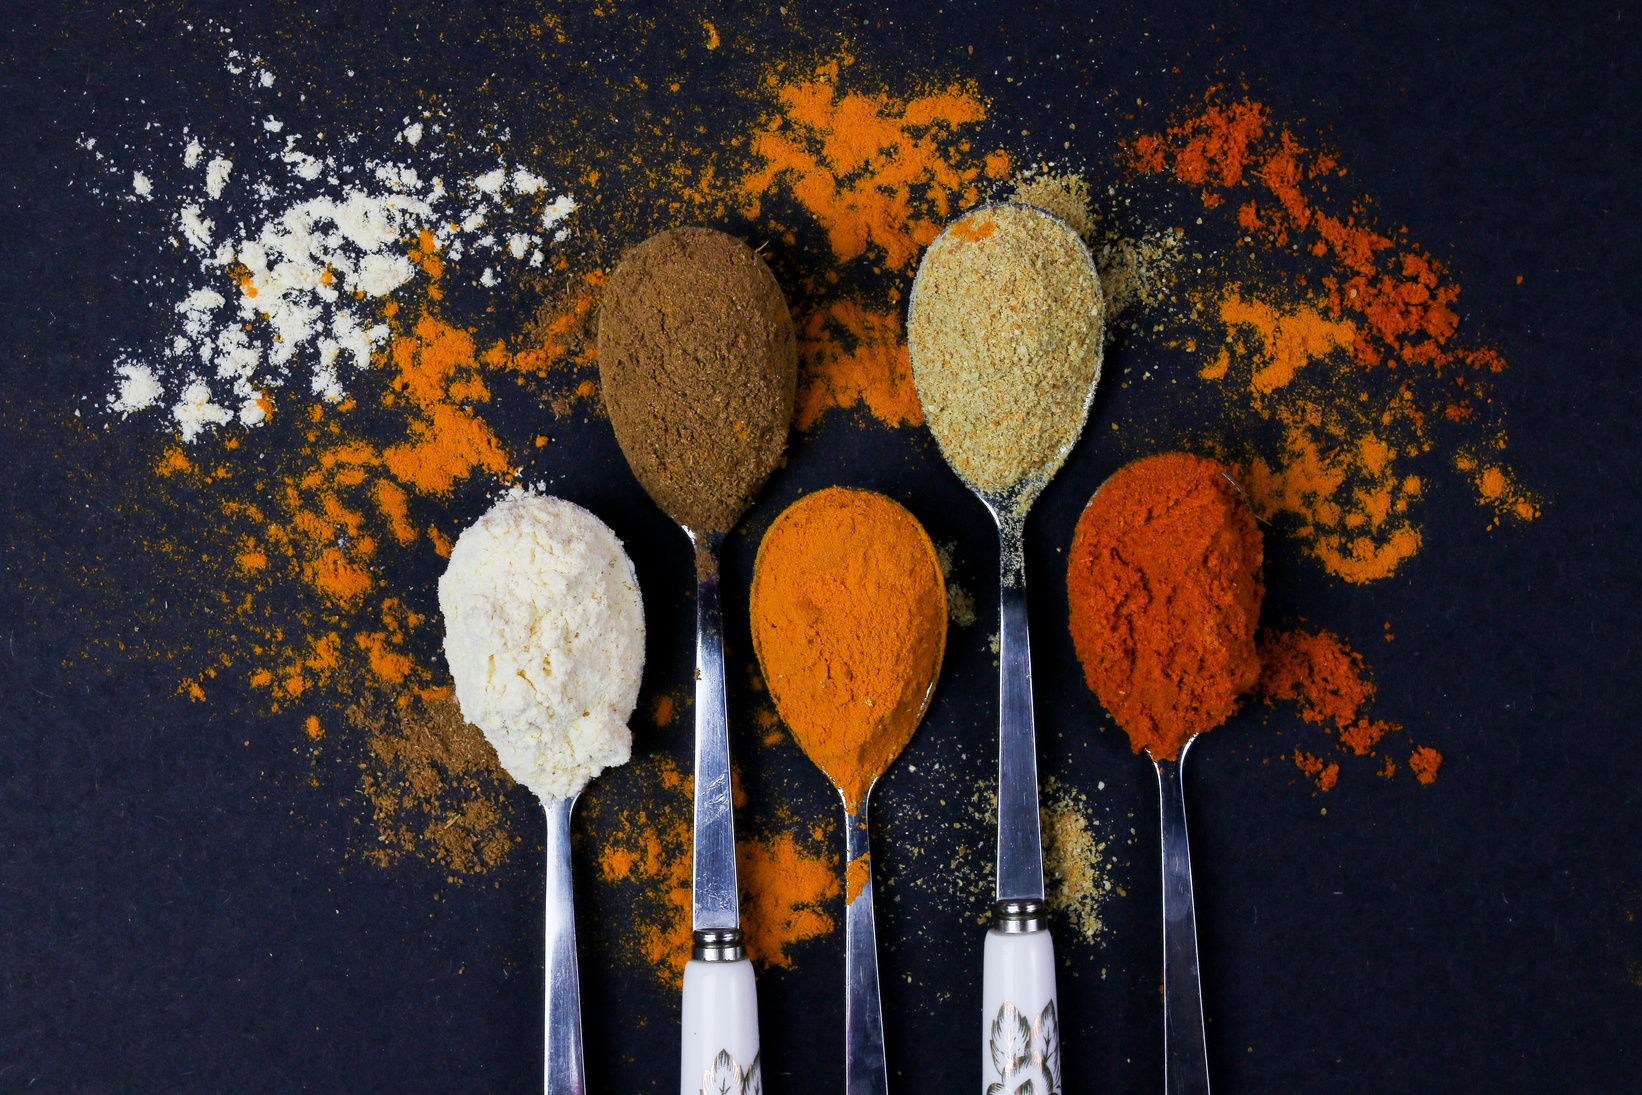  Spoons with Spices